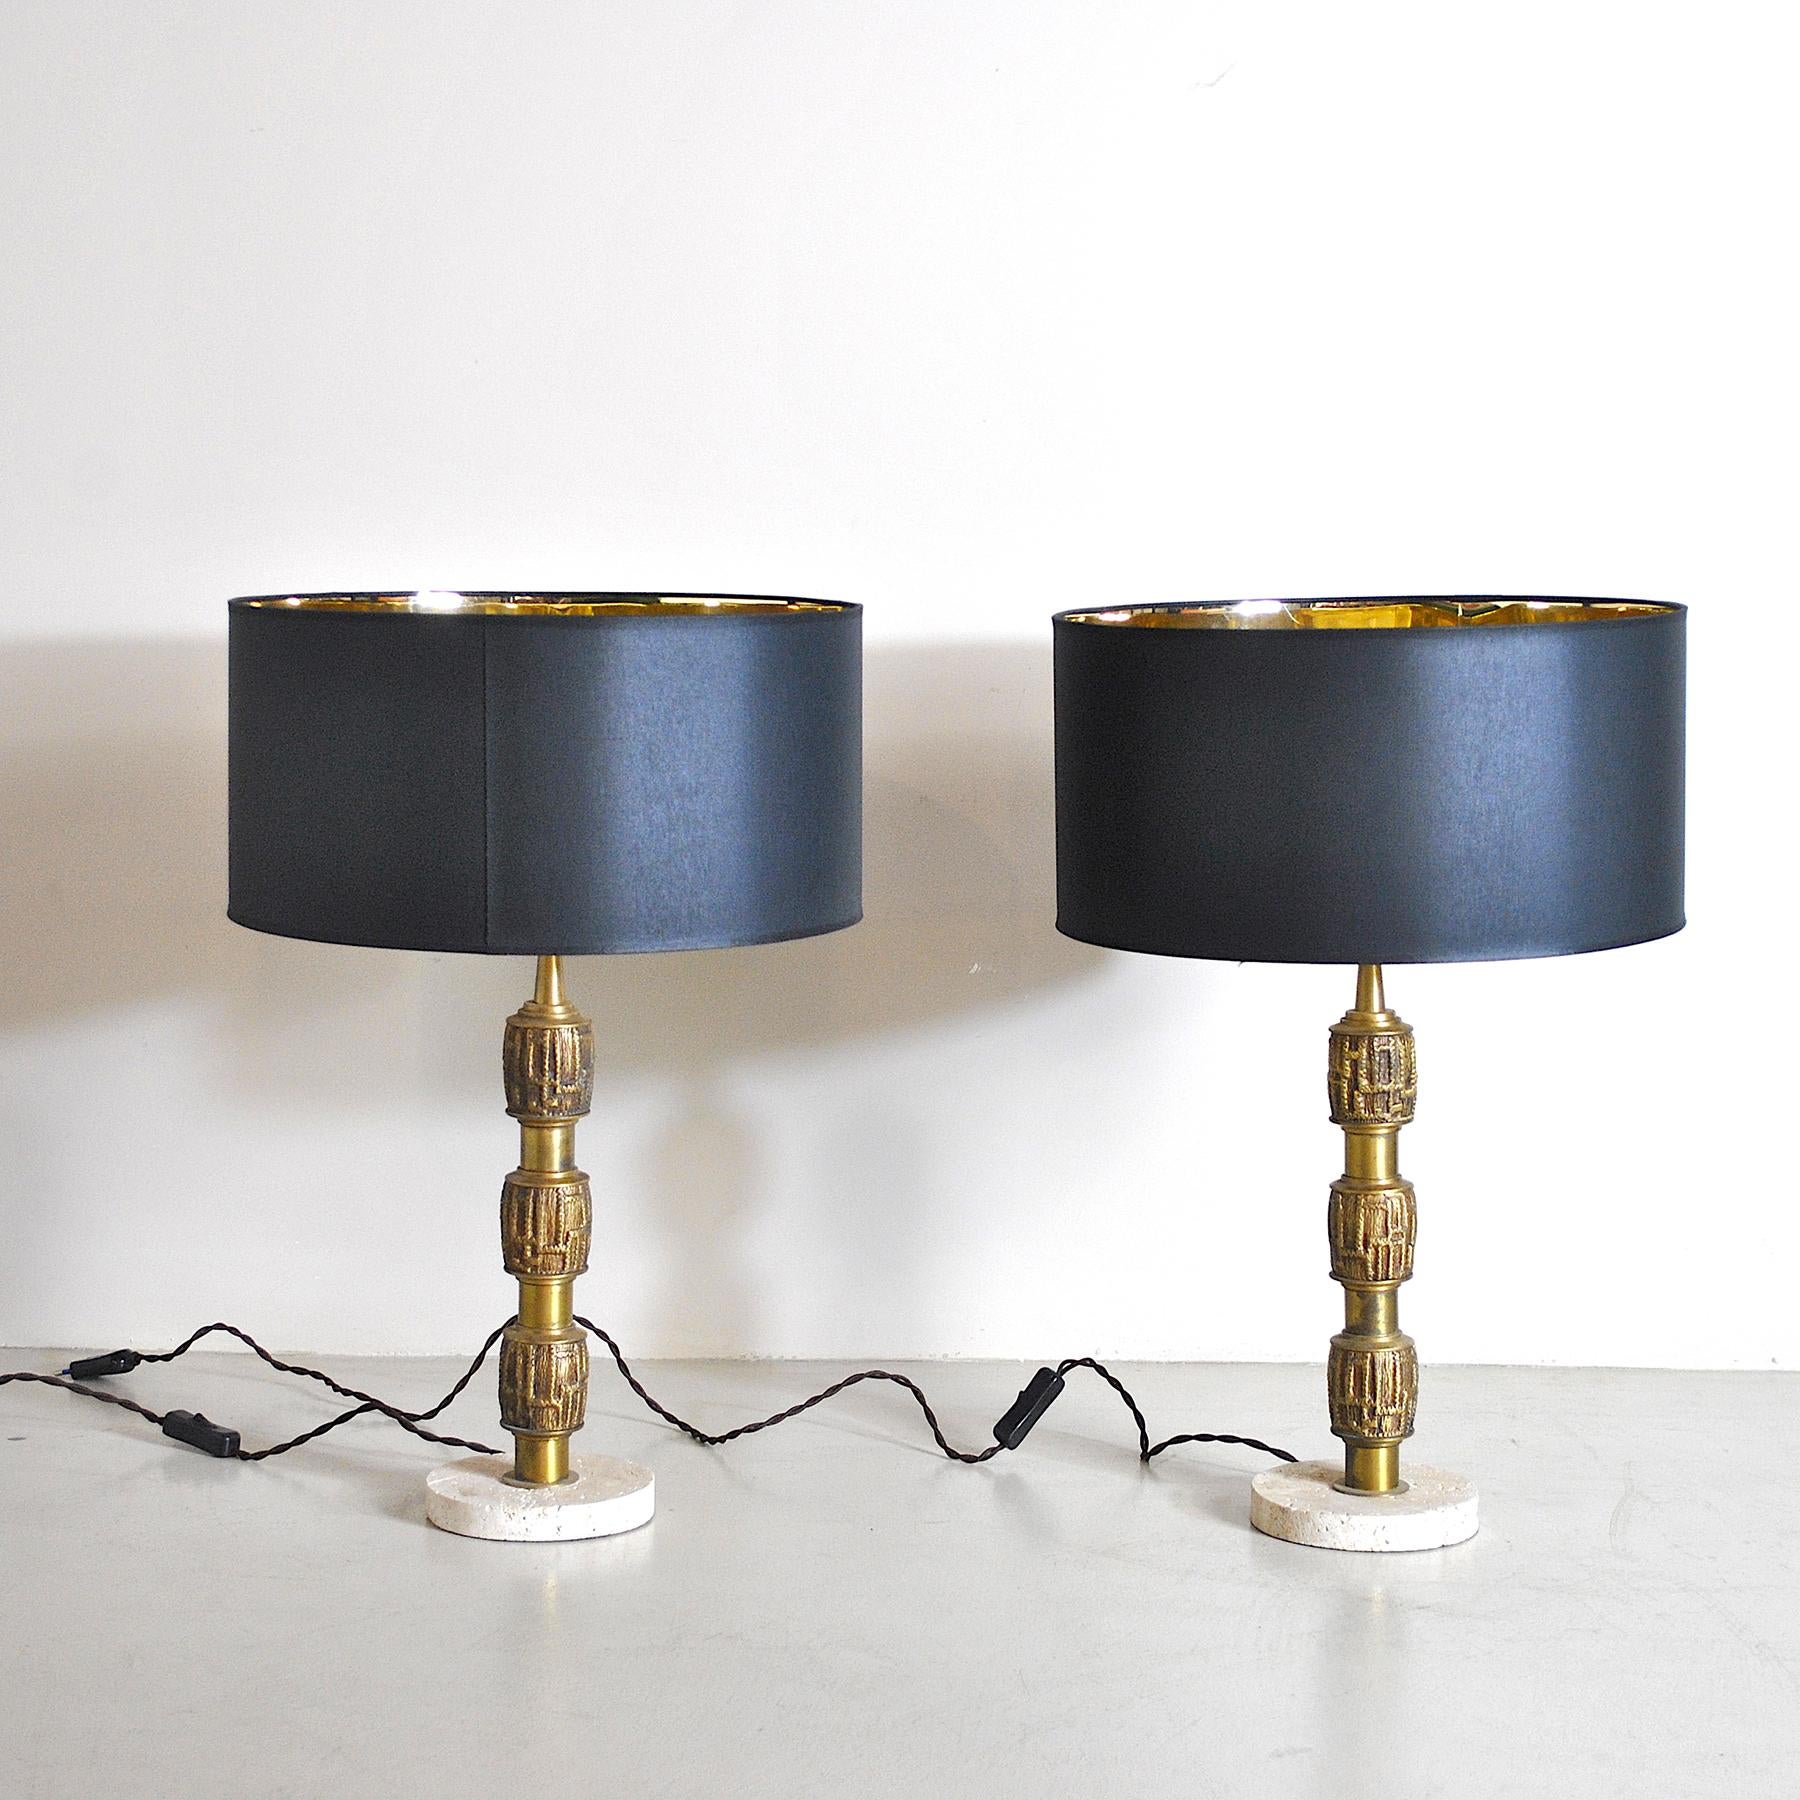 Two table lamps by Luciano Frigerio model Bagdad, in brass and travertine
n.b. the measurements match with the lampshade on.
Lamp is sold without the lampshade

Luciano Frigerio nasce a Desio nel 1928. Il padre Giovanni avvia, dal 1889, una bottega